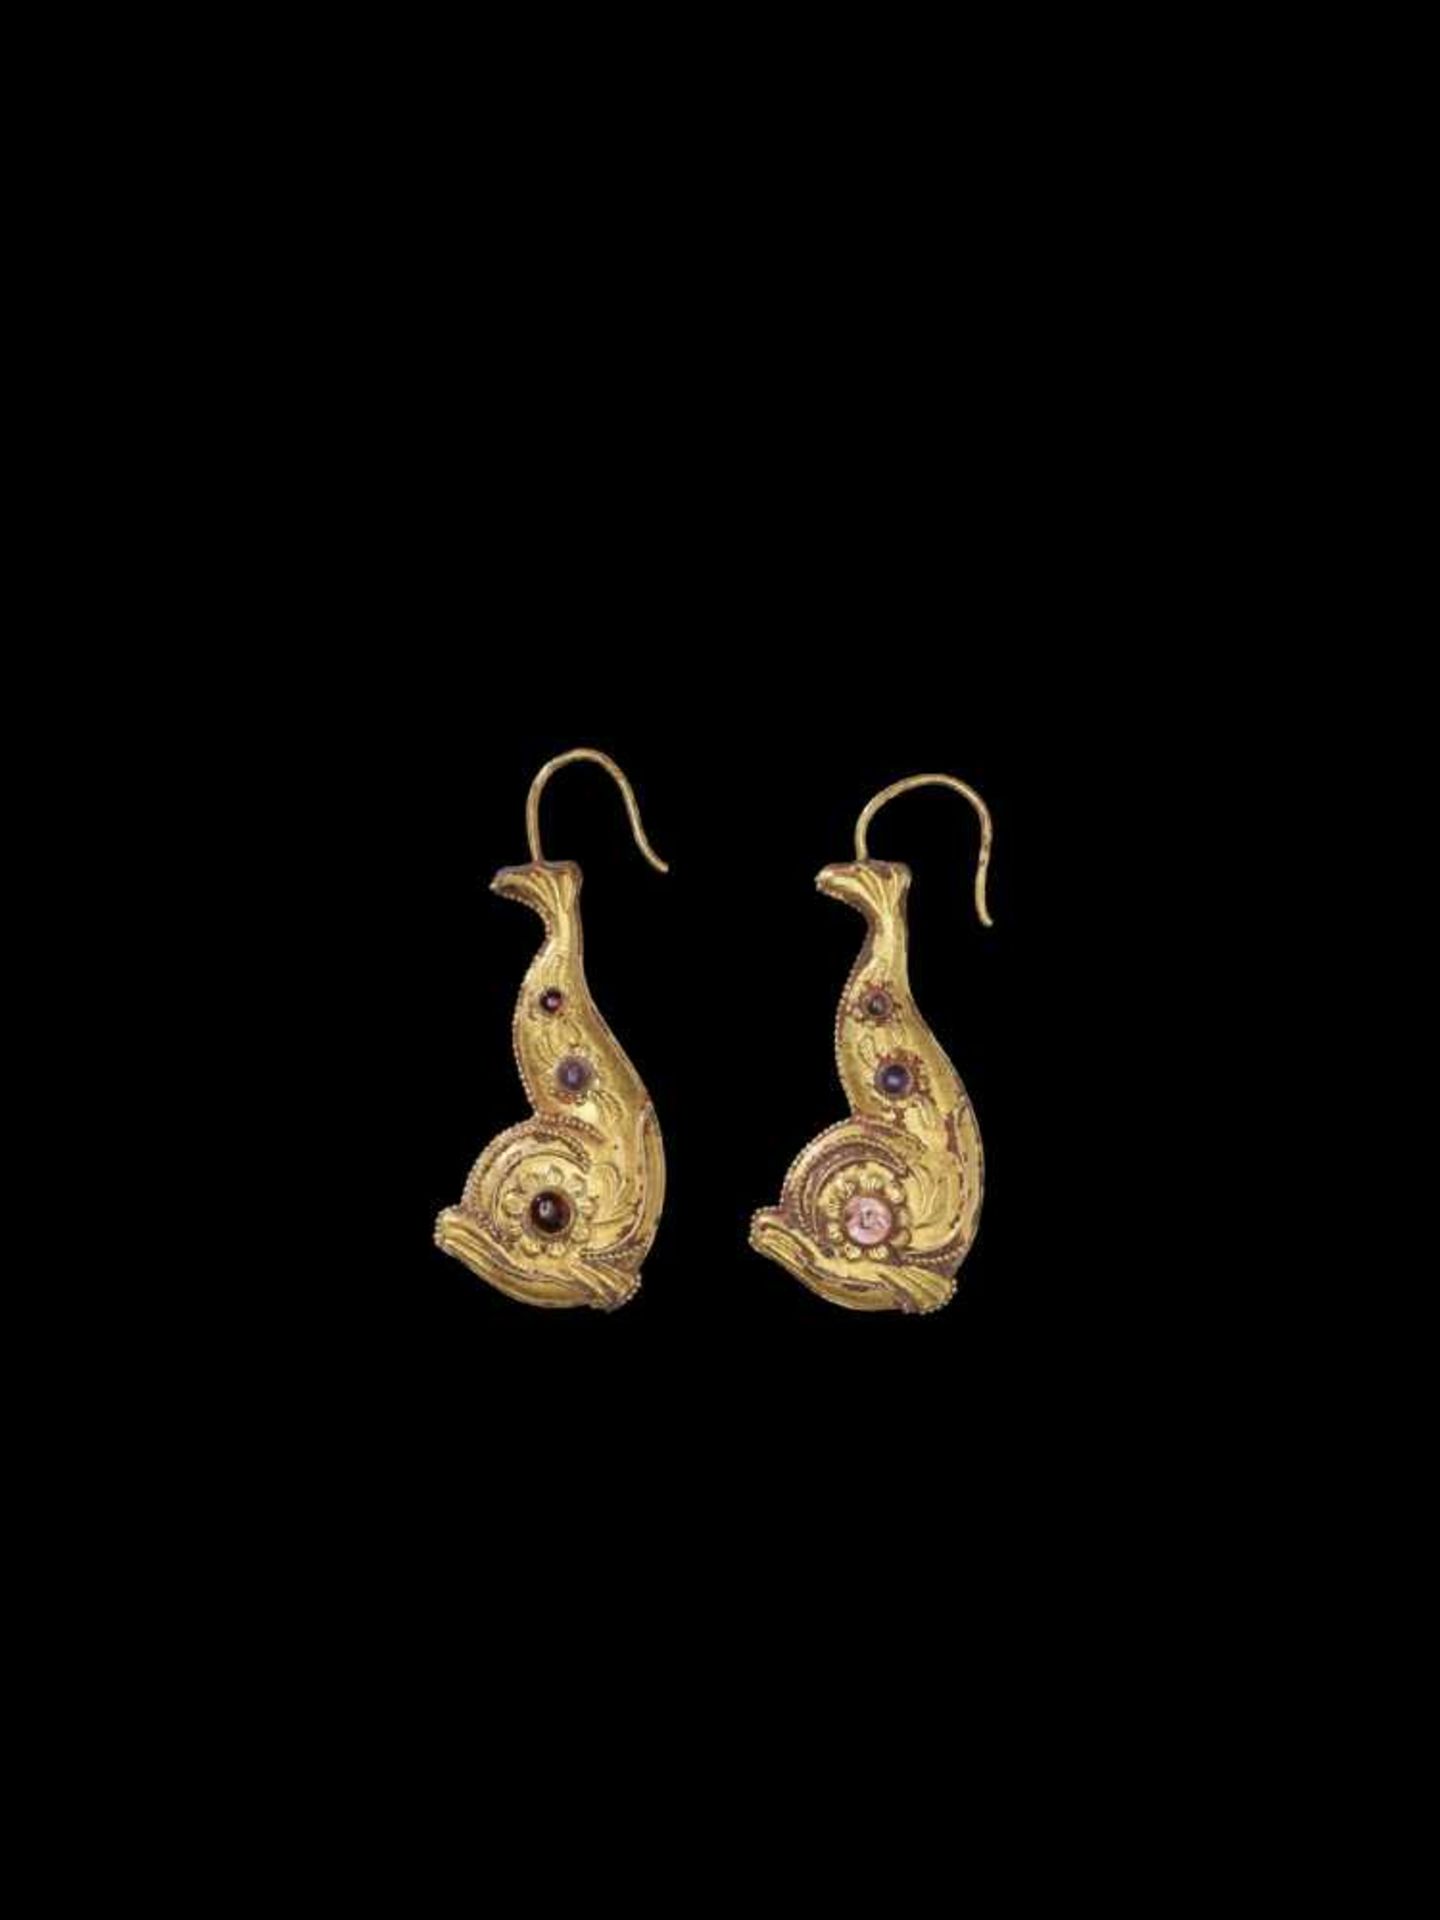 A PAIR OF CHAM REPOUSSÉ GOLD EAR ORNAMENTS Champa, c. 10th century. The earrings crafted in the form - Image 4 of 6